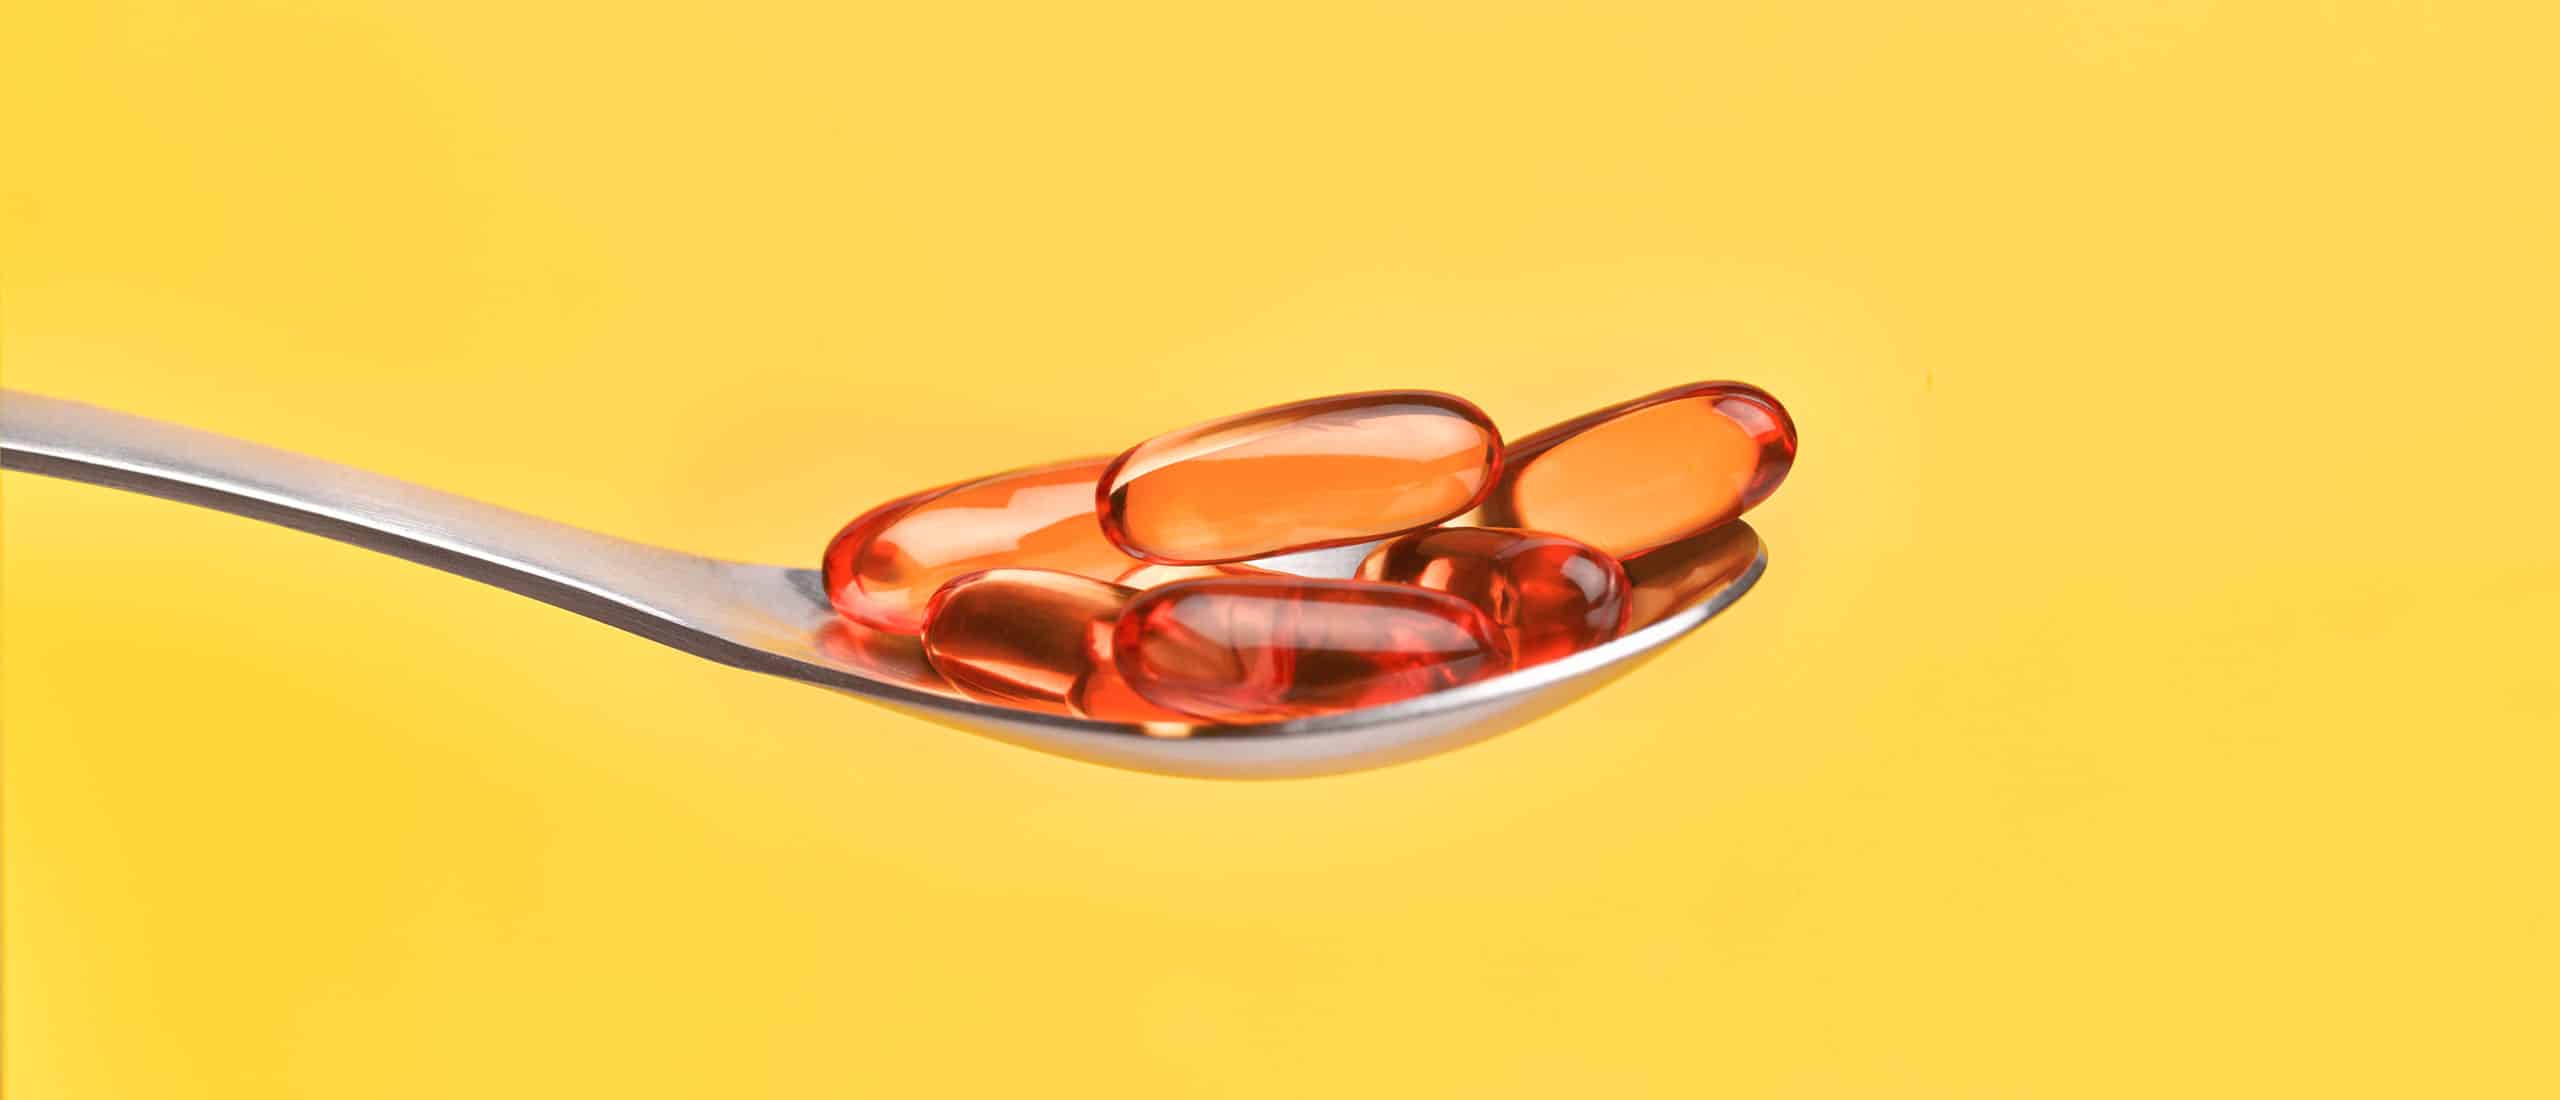 Vitamin D supplements on a spoon